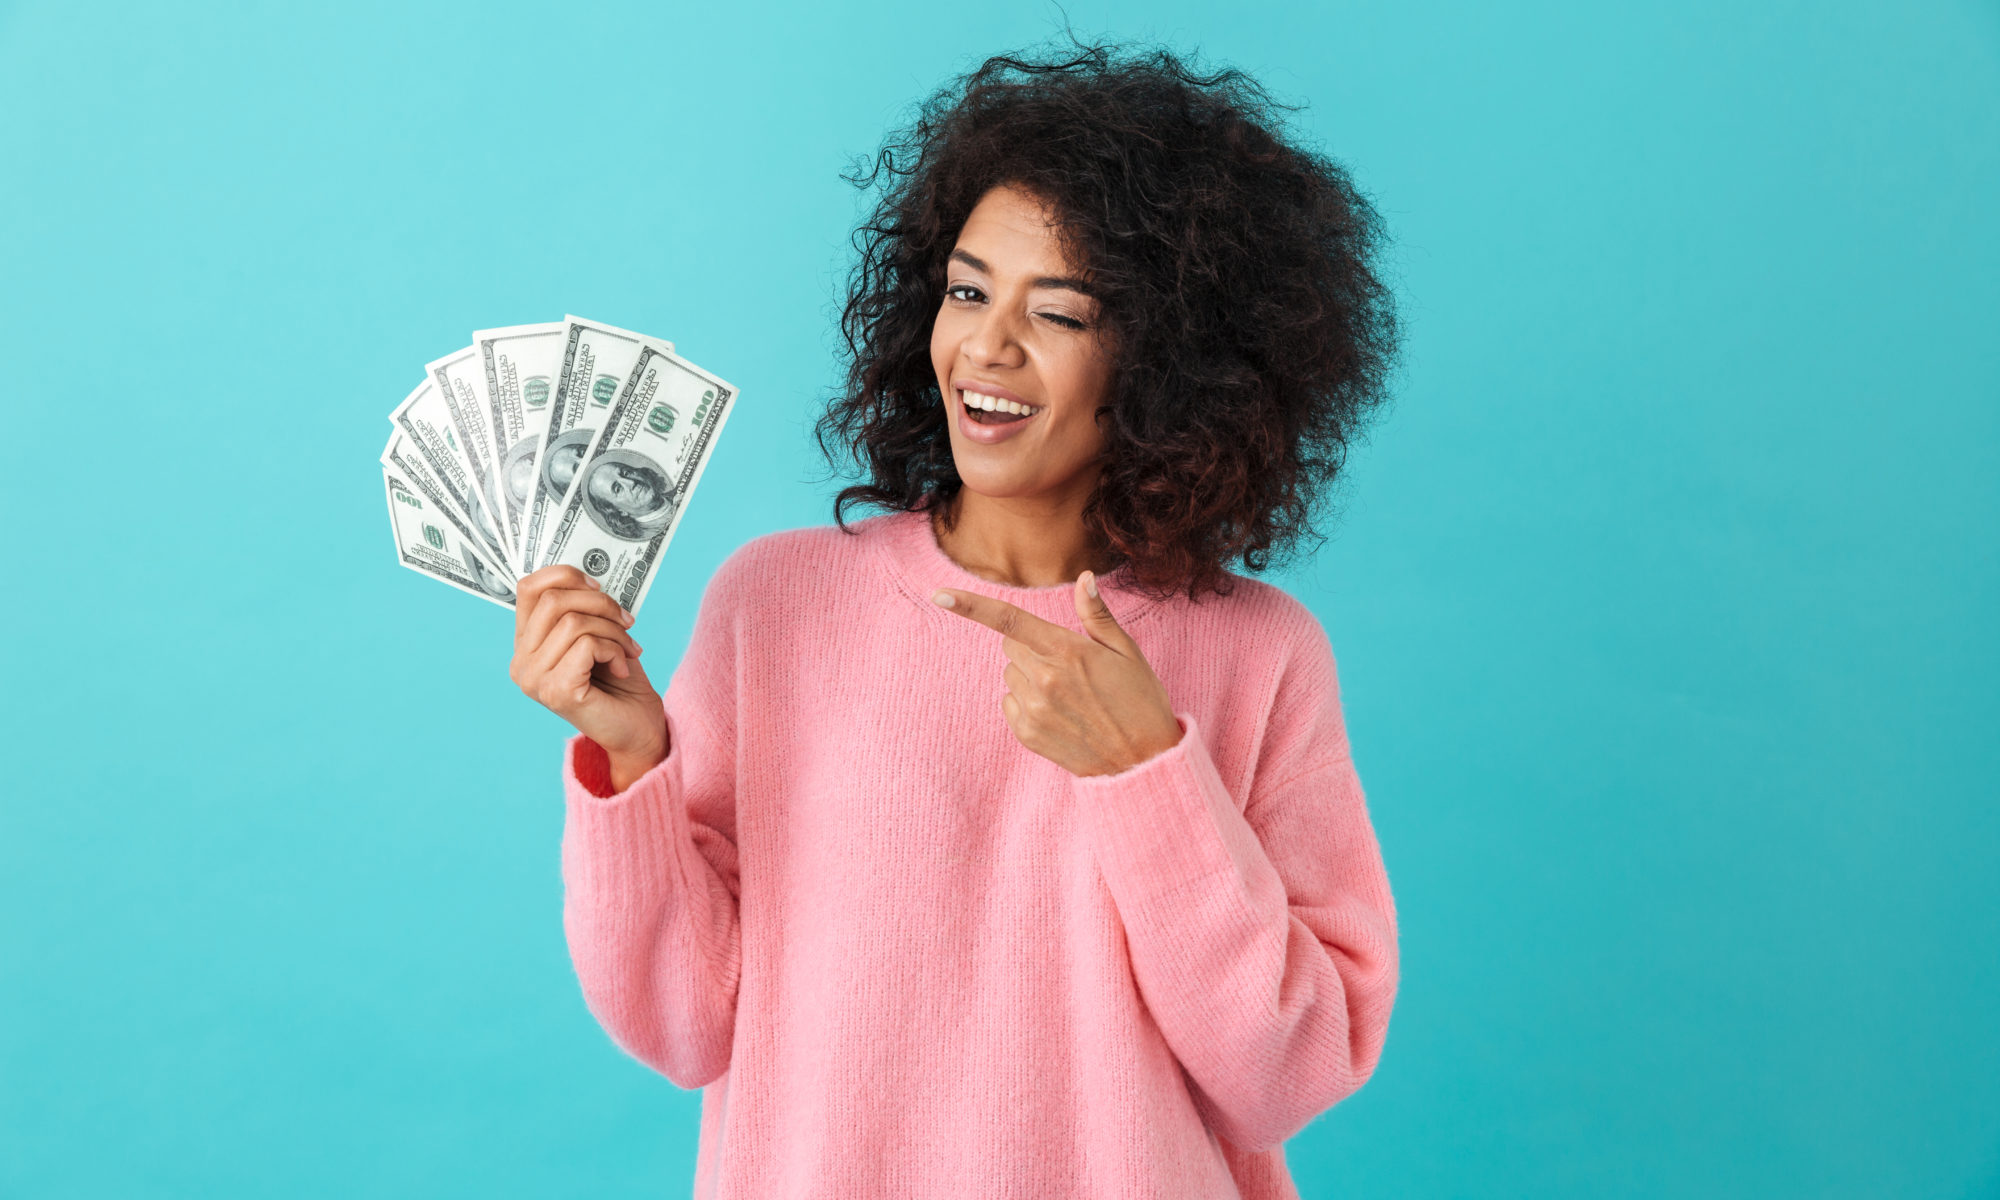 happy woman holding cash and smiling